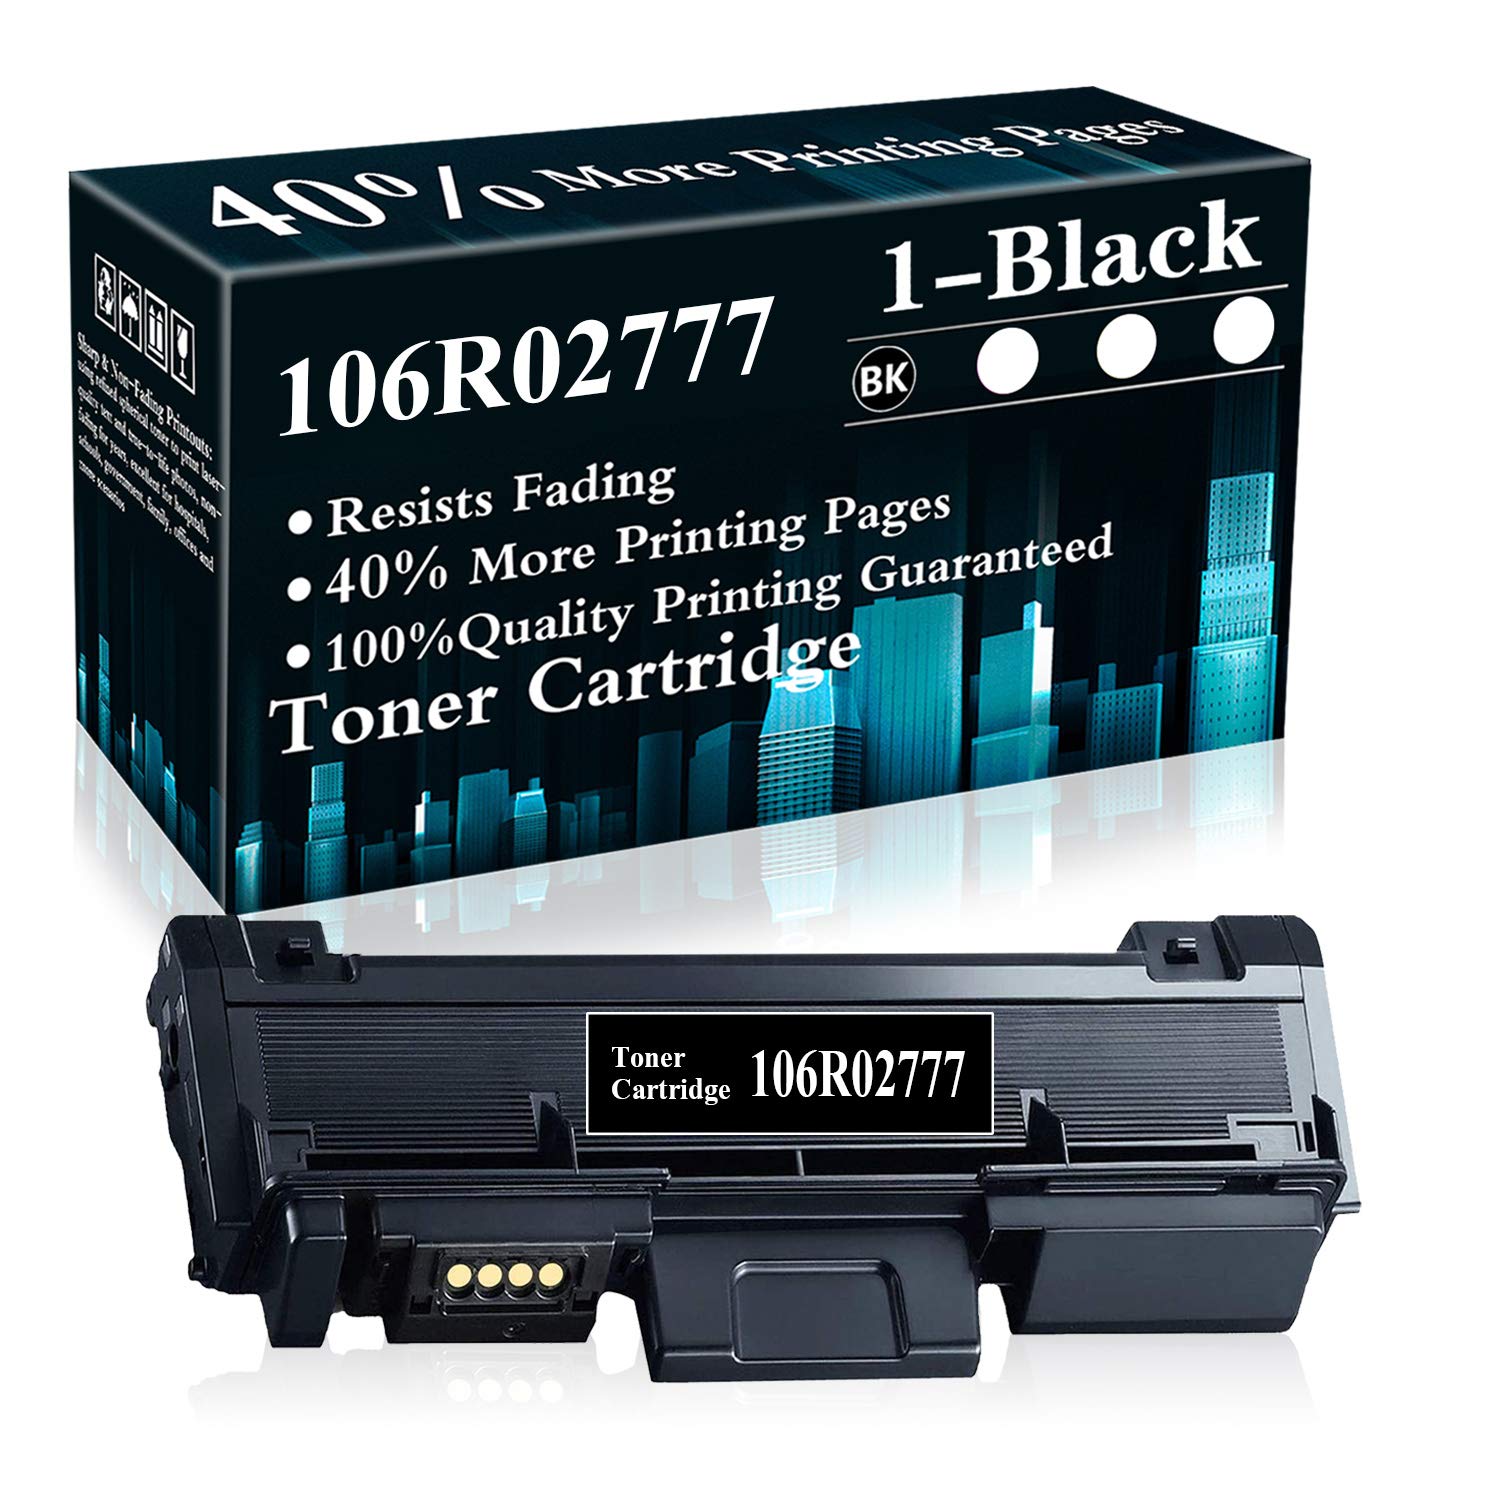 1 Pack 106R02777 Black Toner Cartridge Replacement for Xerox Phaser 3052 3260 3260DI 3260DNI WorkCentre 3215 3215NI 3225 3225DNI Printer,Sold by TopInk